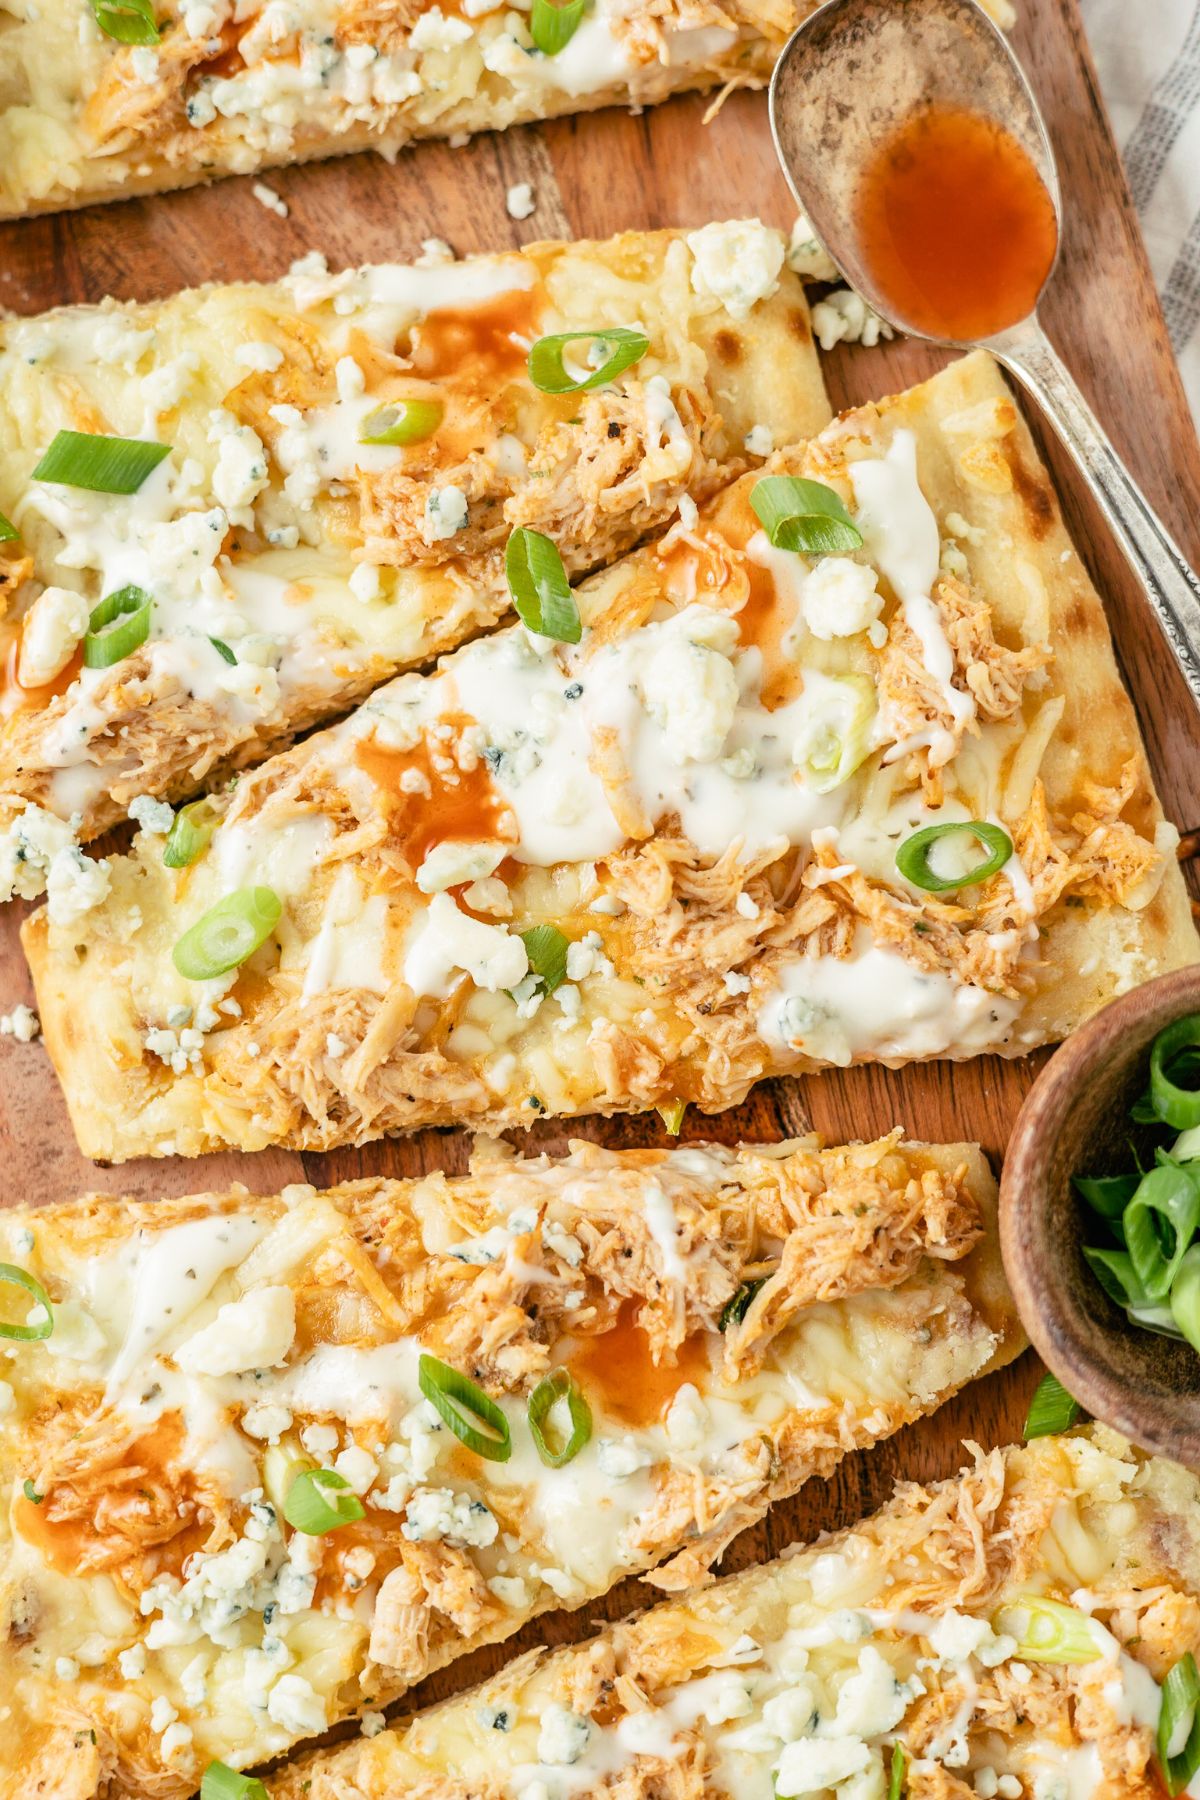 Savory Buffalo Chicken Flatbreads with melted cheese and a hint of spiciness, a delicious and satisfying meal.